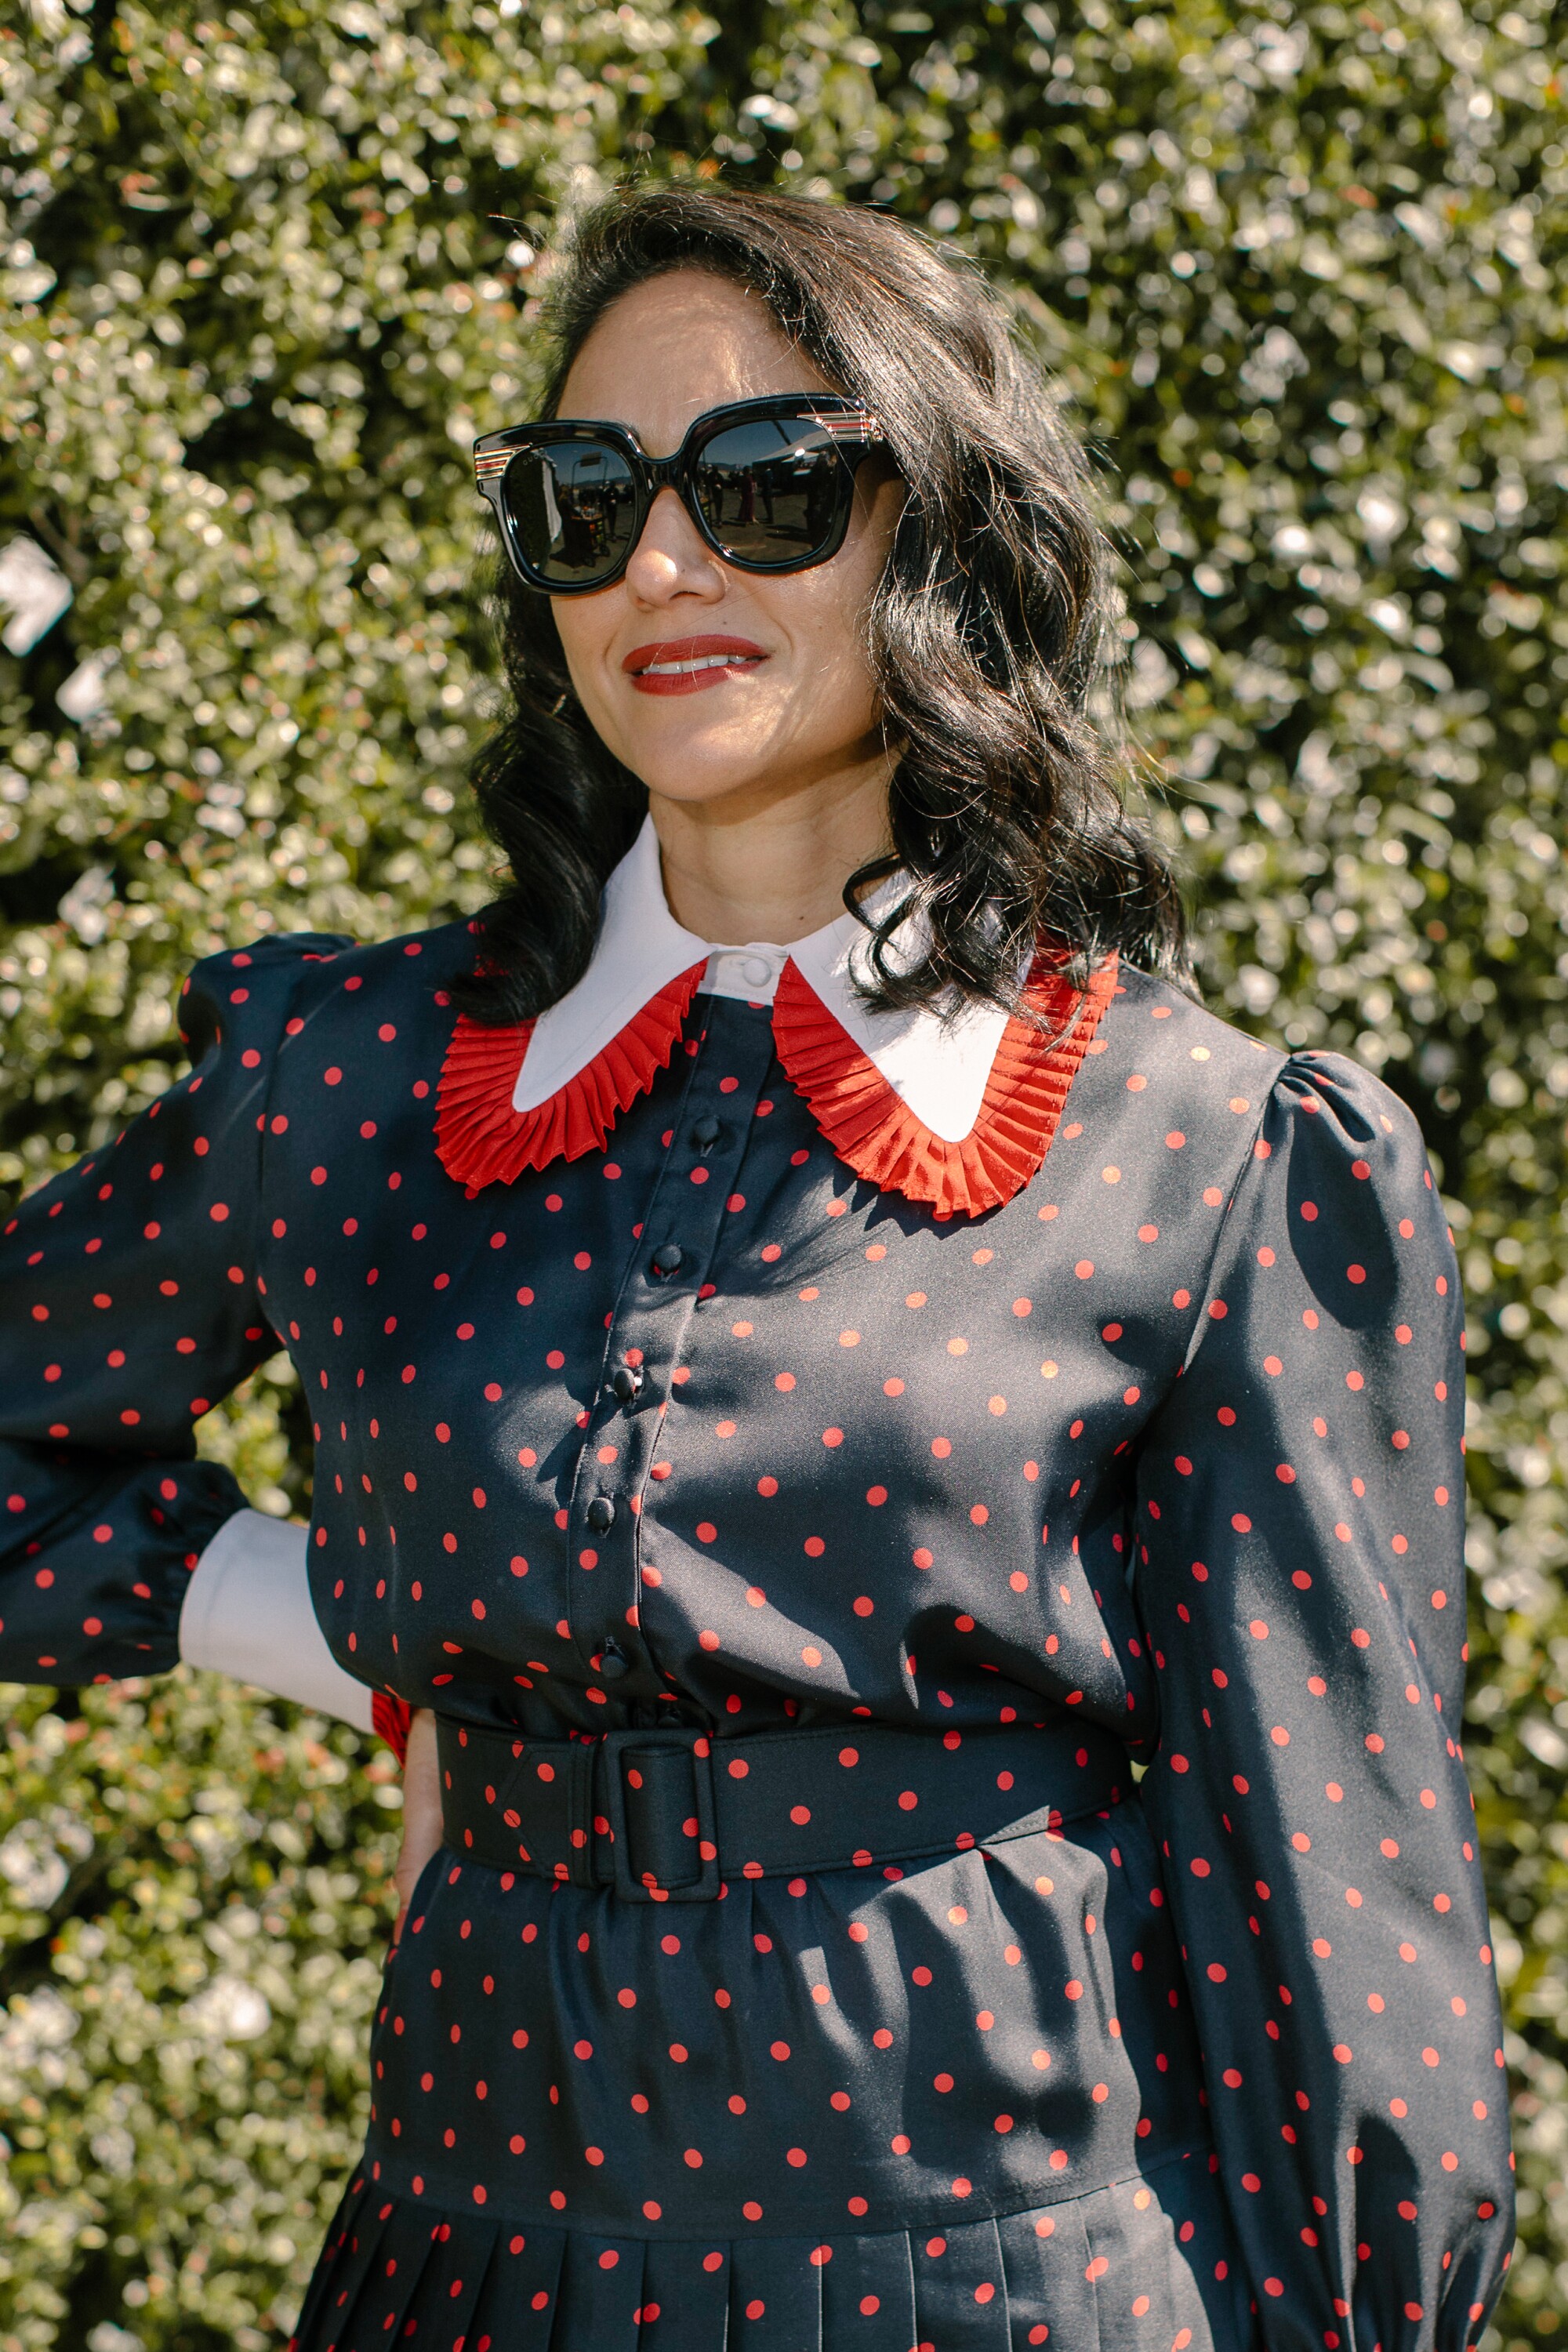 A woman in sunglasses and a dark dress with red dots and a big red and white collar.